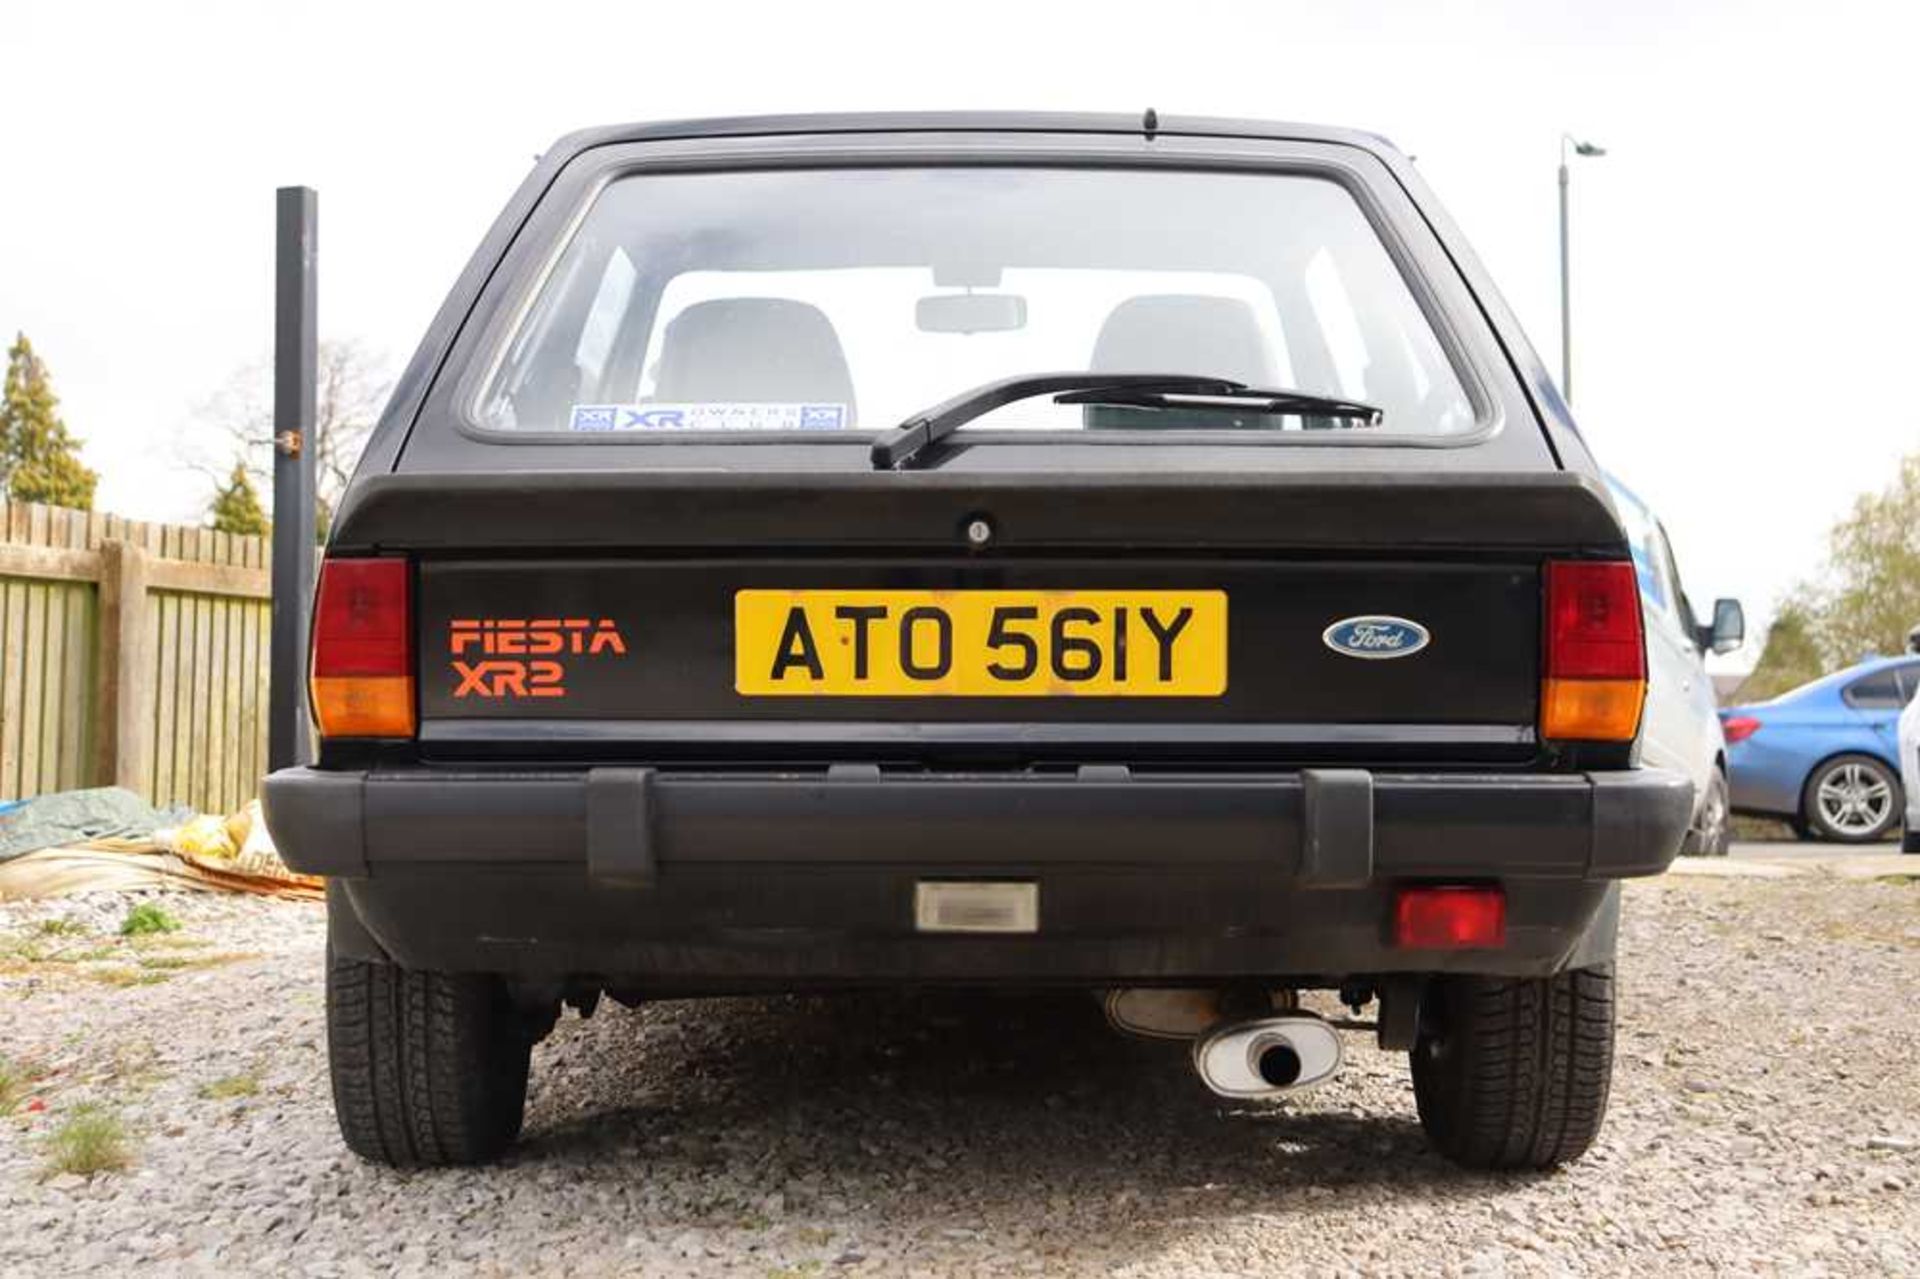 1983 Ford Fiesta XR2 - Image 11 of 56